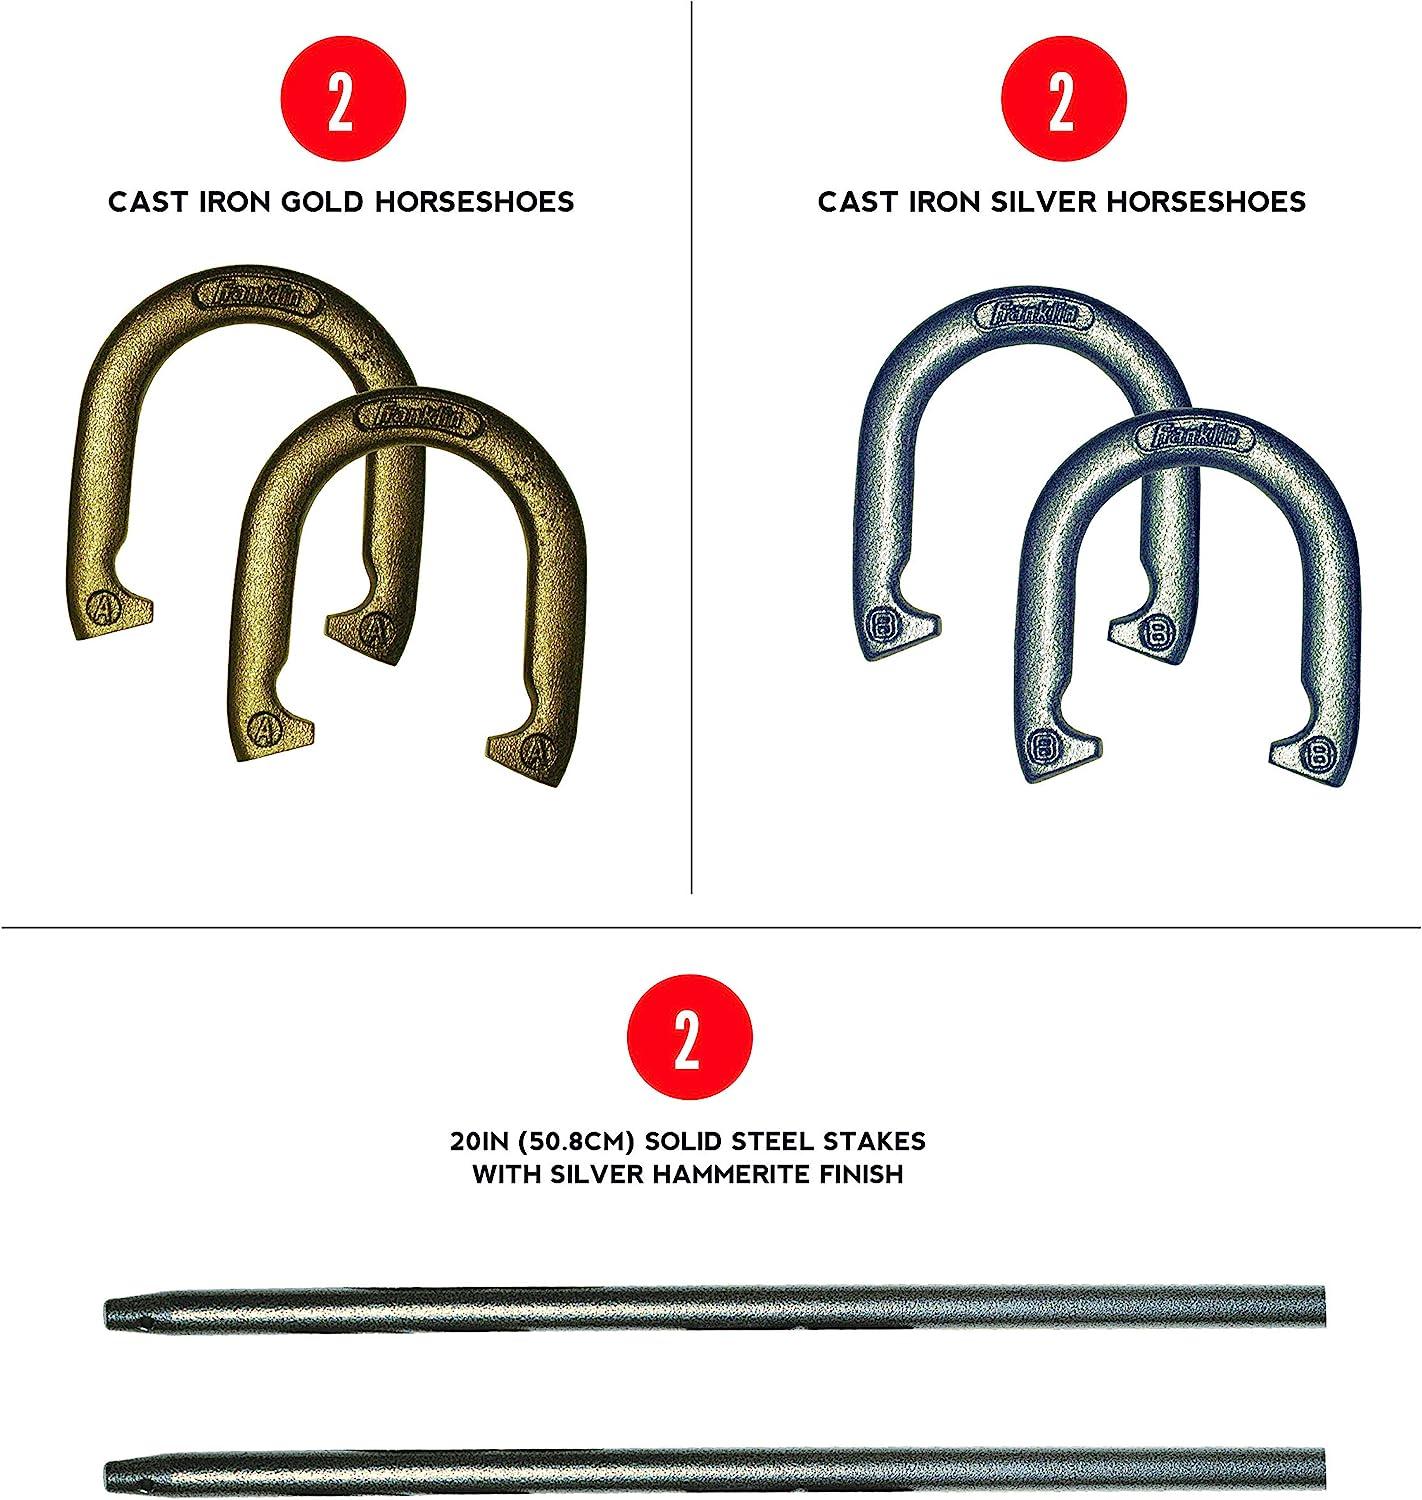 Franklin Sports Horseshoes Sets - Metal Horseshoe Game Sets for Adults +  Kids - Official Weight Steel Horseshoes - Beach + Lawn Horseshoes Sets -  Sets Include (4) Horseshoes and (2) Ground Stakes Starter